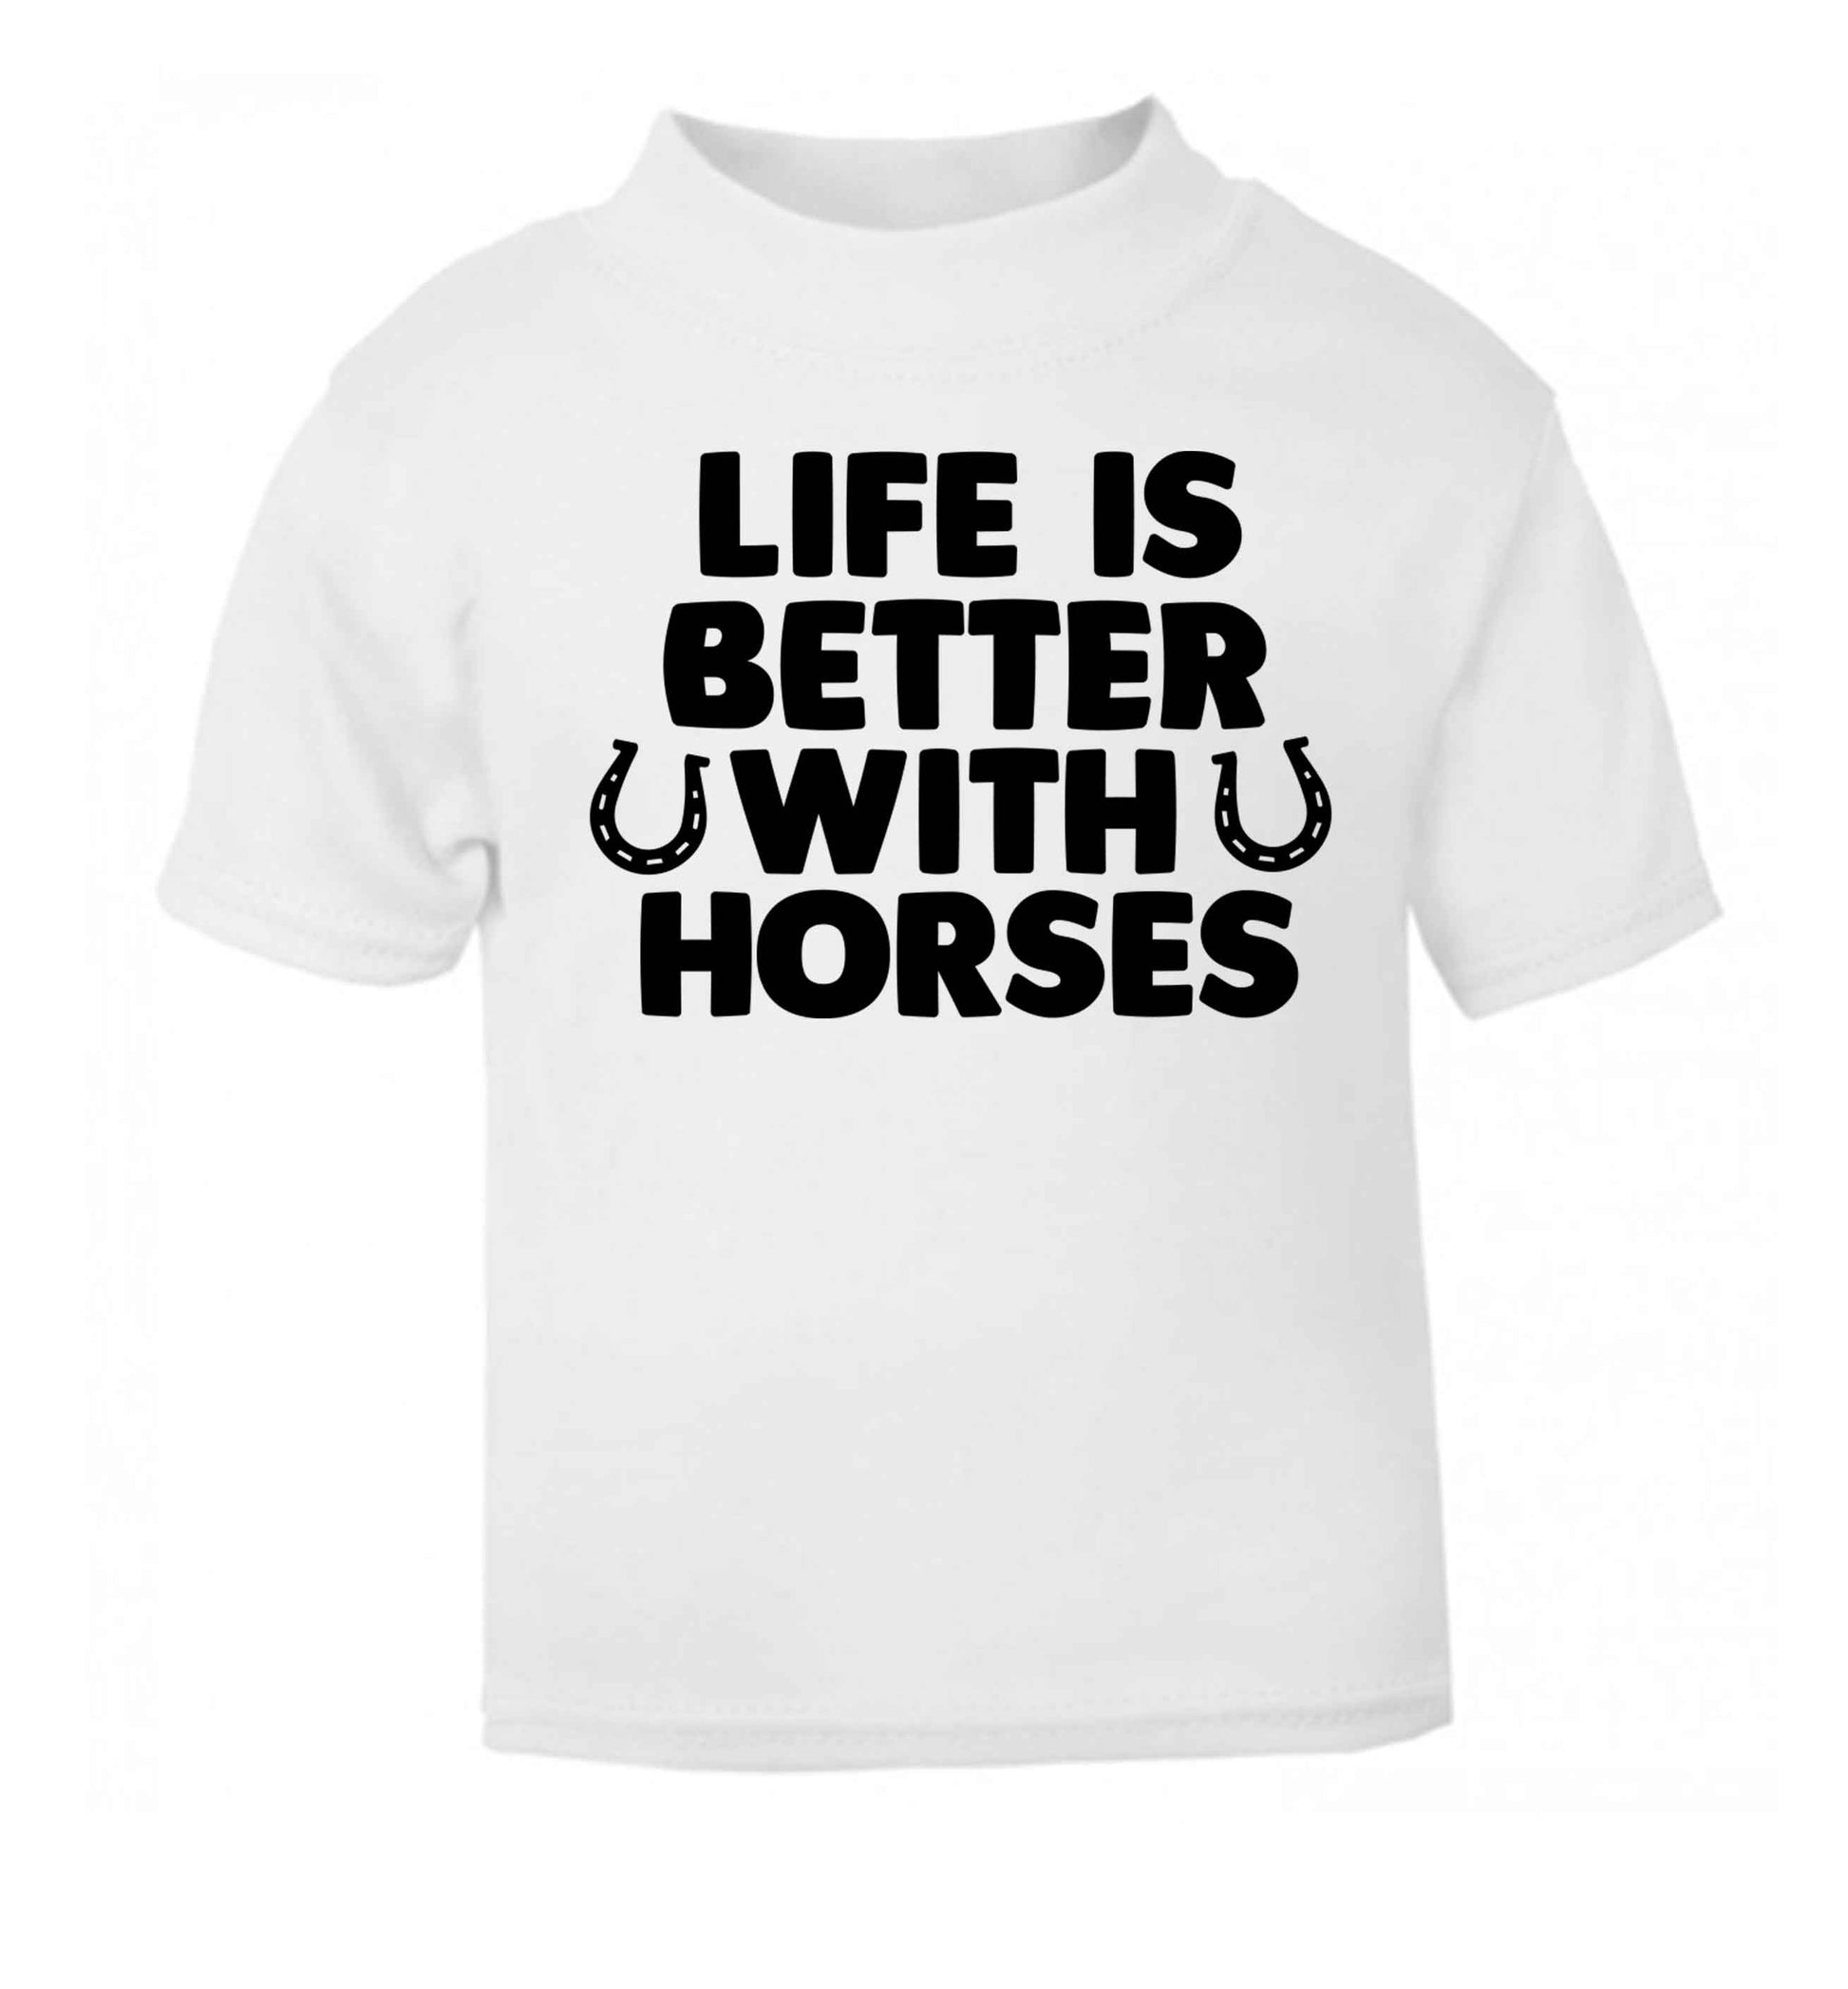 Life is better with horses white baby toddler Tshirt 2 Years